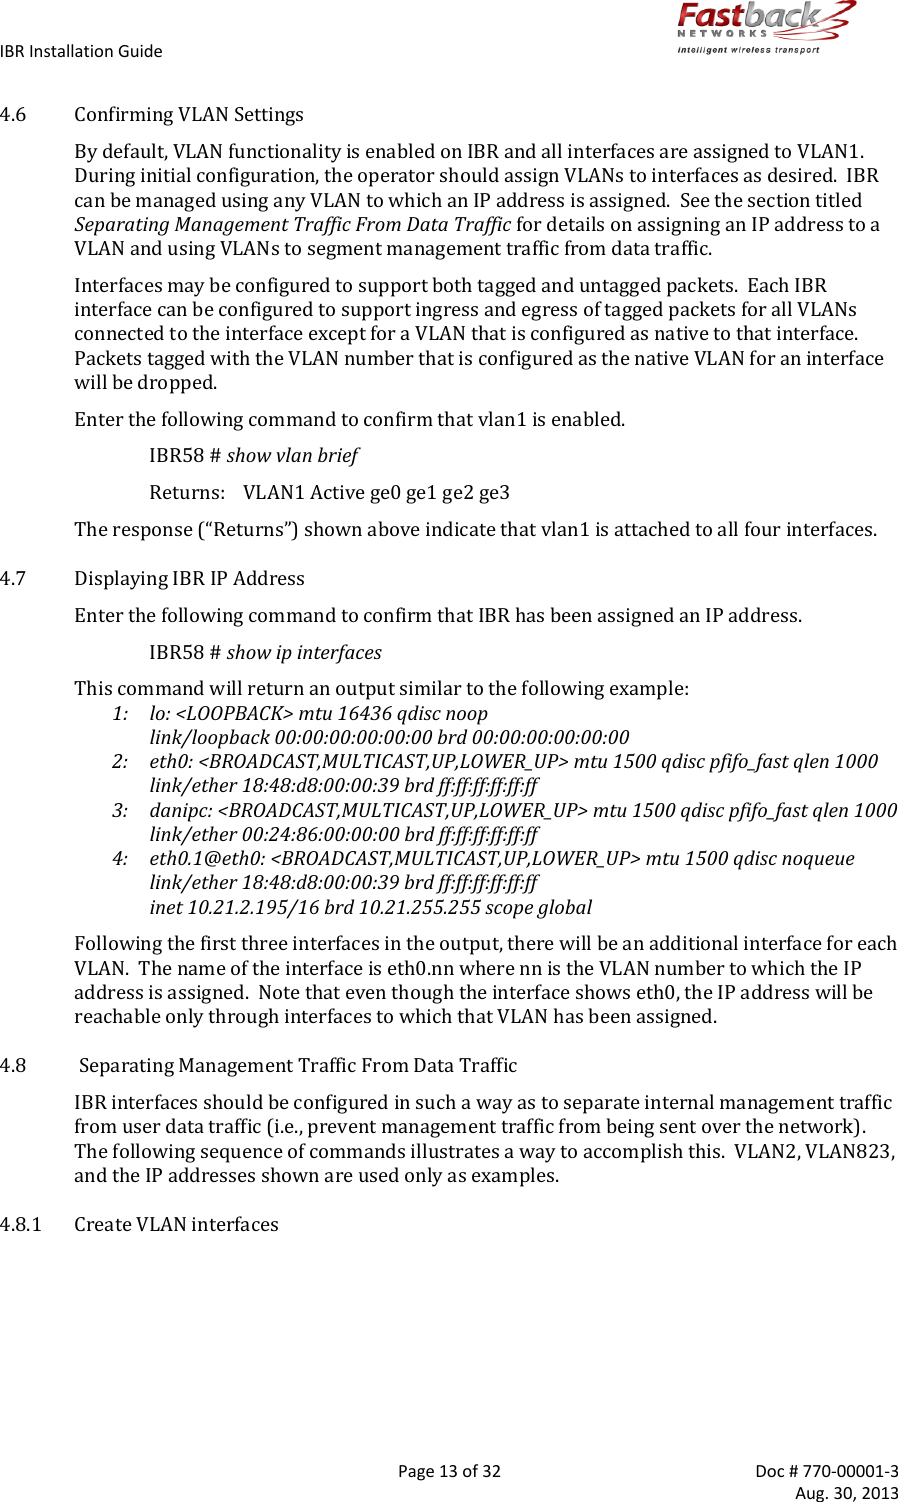 IBR Installation Guide        Page 13 of 32  Doc # 770-00001-3     Aug. 30, 2013   4.6 Confirming VLAN Settings By default, VLAN functionality is enabled on IBR and all interfaces are assigned to VLAN1.   During initial configuration, the operator should assign VLANs to interfaces as desired.  IBR can be managed using any VLAN to which an IP address is assigned.  See the section titled Separating Management Traffic From Data Traffic for details on assigning an IP address to a VLAN and using VLANs to segment management traffic from data traffic.   Interfaces may be configured to support both tagged and untagged packets.  Each IBR interface can be configured to support ingress and egress of tagged packets for all VLANs connected to the interface except for a VLAN that is configured as native to that interface.   Packets tagged with the VLAN number that is configured as the native VLAN for an interface will be dropped. Enter the following command to confirm that vlan1 is enabled. IBR58 # show vlan brief   Returns:  VLAN1 Active ge0 ge1 ge2 ge3 The response (“Returns”) shown above indicate that vlan1 is attached to all four interfaces. 4.7 Displaying IBR IP Address Enter the following command to confirm that IBR has been assigned an IP address. IBR58 # show ip interfaces This command will return an output similar to the following example:   1:  lo: &lt;LOOPBACK&gt; mtu 16436 qdisc noop        link/loopback 00:00:00:00:00:00 brd 00:00:00:00:00:00 2:   eth0: &lt;BROADCAST,MULTICAST,UP,LOWER_UP&gt; mtu 1500 qdisc pfifo_fast qlen 1000       link/ether 18:48:d8:00:00:39 brd ff:ff:ff:ff:ff:ff 3:   danipc: &lt;BROADCAST,MULTICAST,UP,LOWER_UP&gt; mtu 1500 qdisc pfifo_fast qlen 1000       link/ether 00:24:86:00:00:00 brd ff:ff:ff:ff:ff:ff 4:   eth0.1@eth0: &lt;BROADCAST,MULTICAST,UP,LOWER_UP&gt; mtu 1500 qdisc noqueue        link/ether 18:48:d8:00:00:39 brd ff:ff:ff:ff:ff:ff      inet 10.21.2.195/16 brd 10.21.255.255 scope global Following the first three interfaces in the output, there will be an additional interface for each VLAN.  The name of the interface is eth0.nn where nn is the VLAN number to which the IP address is assigned.  Note that even though the interface shows eth0, the IP address will be reachable only through interfaces to which that VLAN has been assigned. 4.8  Separating Management Traffic From Data Traffic IBR interfaces should be configured in such a way as to separate internal management traffic from user data traffic (i.e., prevent management traffic from being sent over the network).  The following sequence of commands illustrates a way to accomplish this.  VLAN2, VLAN823, and the IP addresses shown are used only as examples. 4.8.1 Create VLAN interfaces  